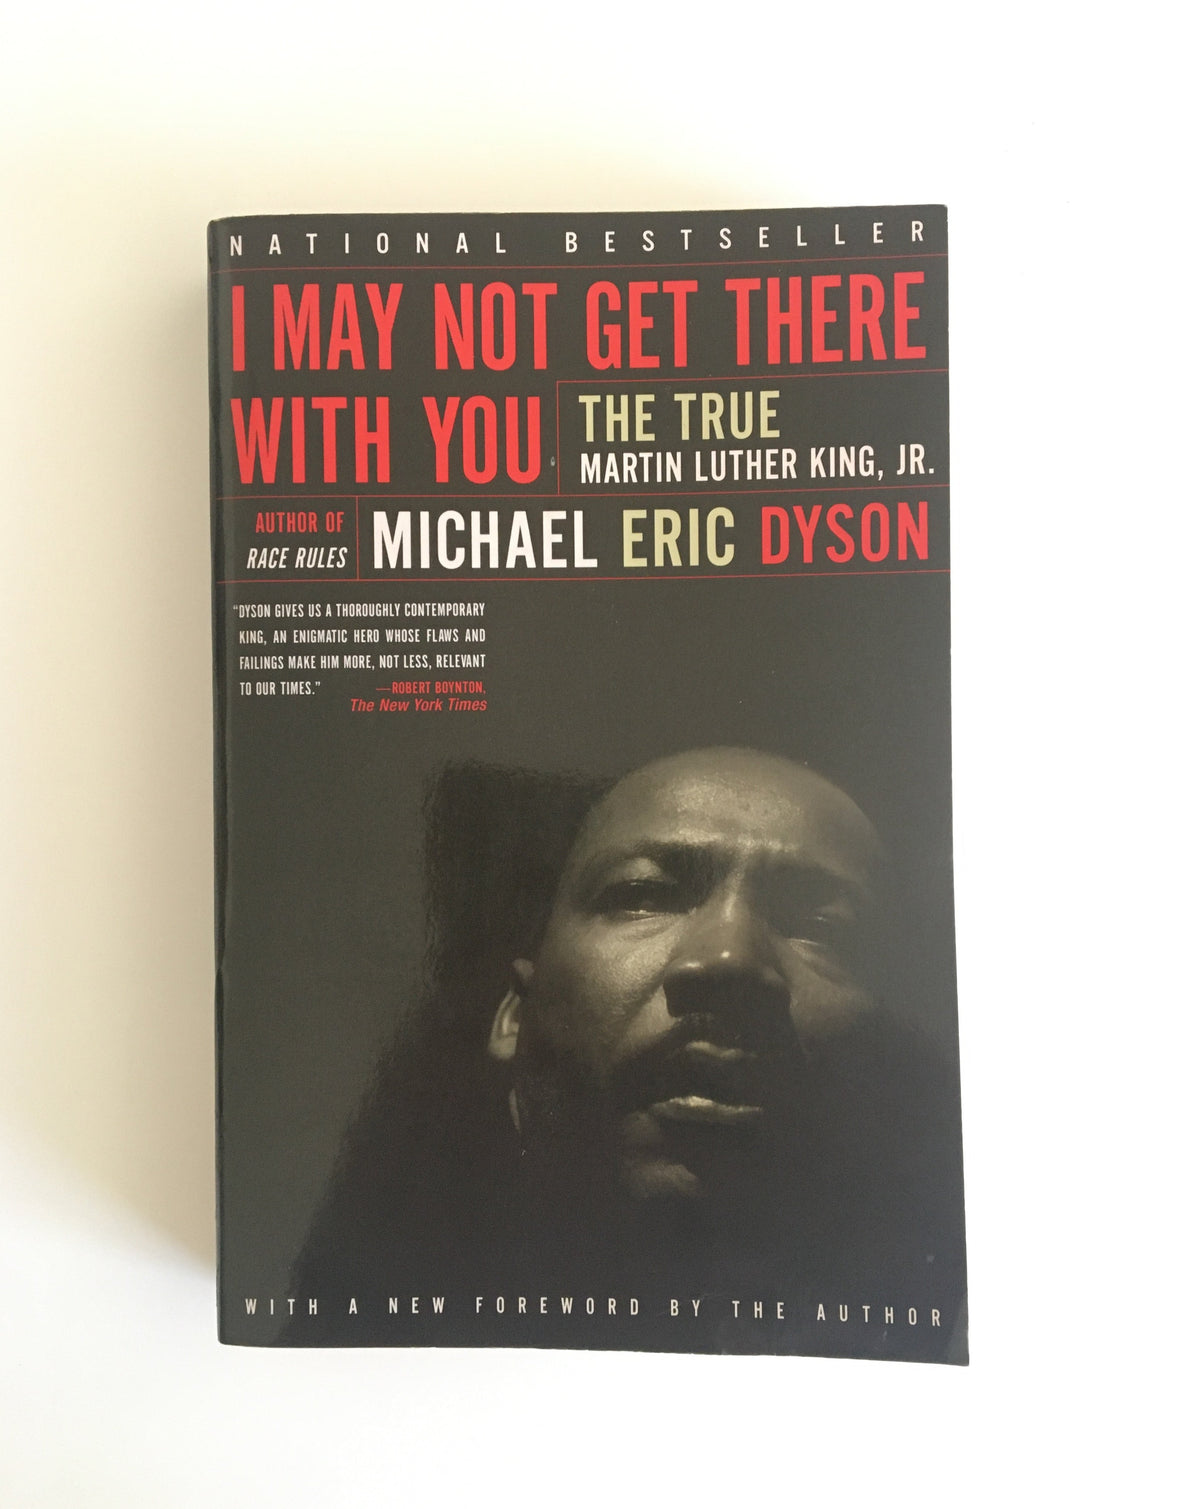 I May Not Get There With You: The True Martin Luther King Jr. by Michael Eric Dyson